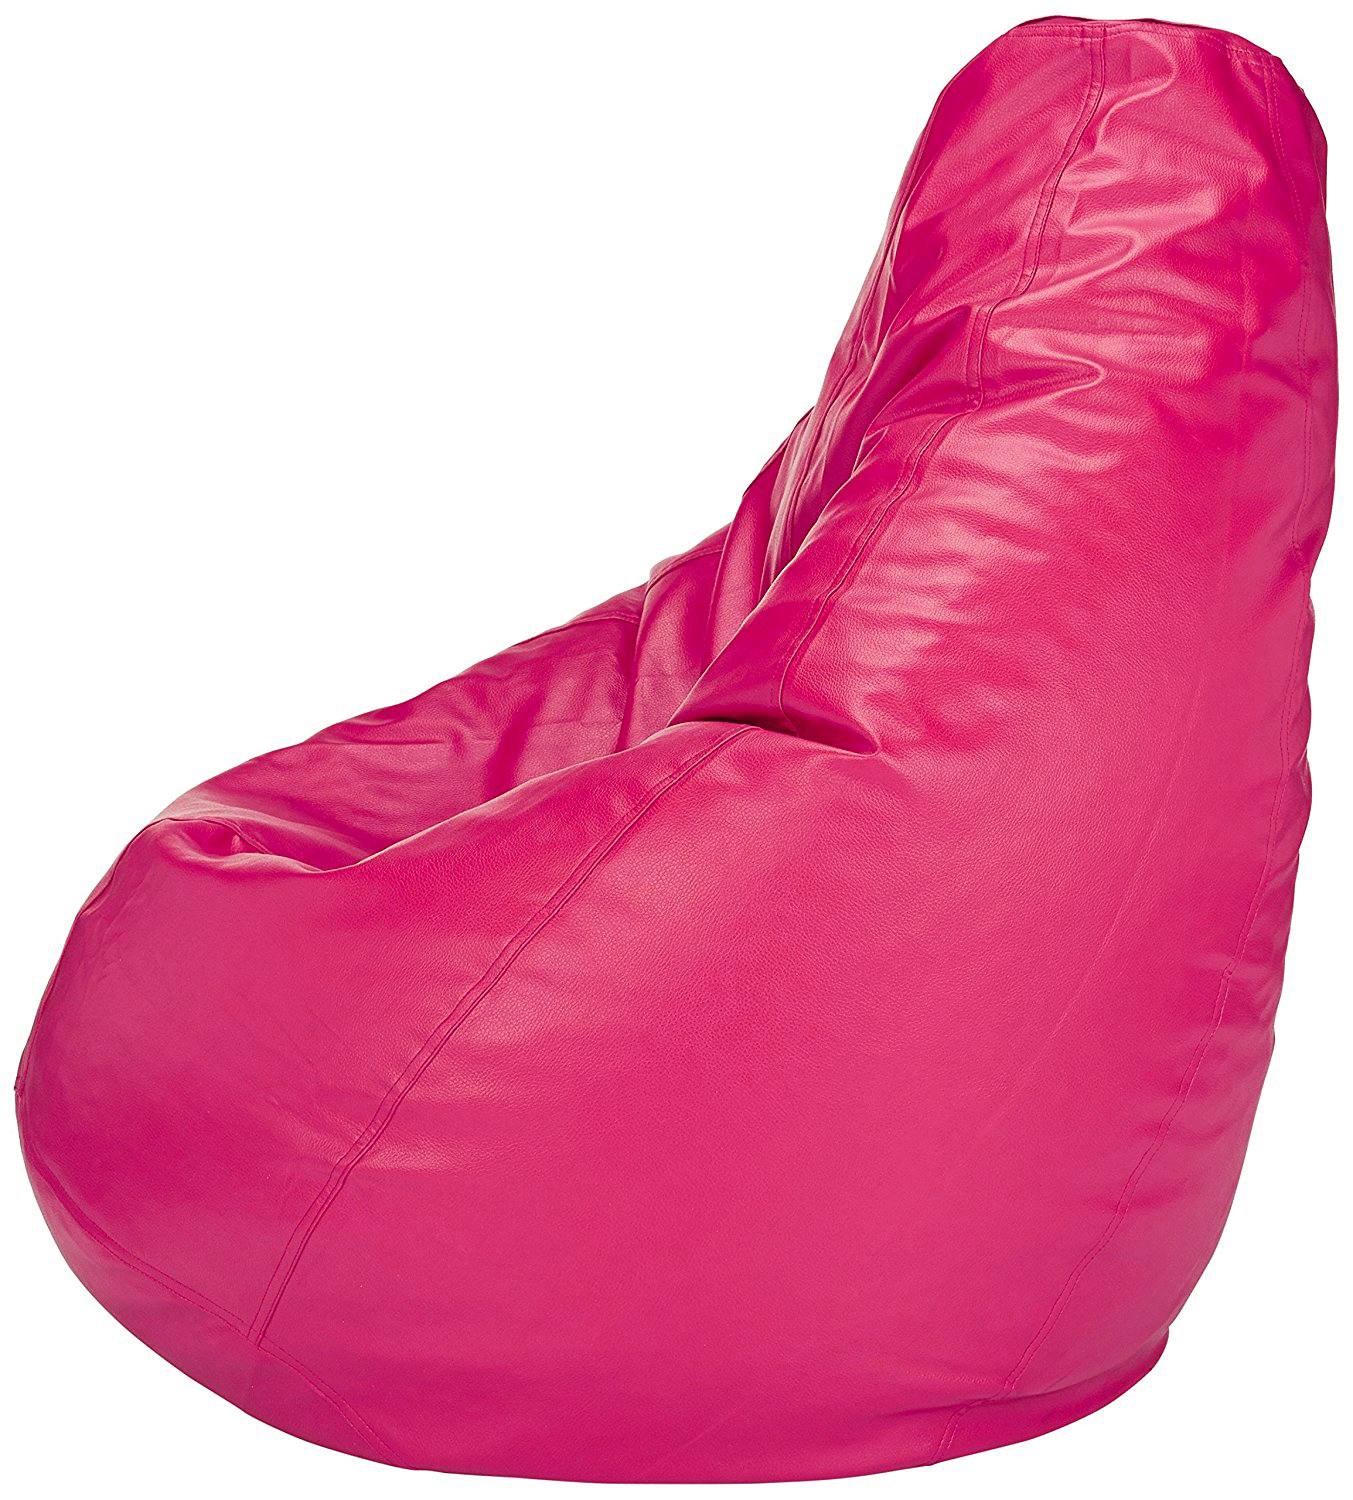 Buy Home Berry XL Pink Bean Bag (Without Beans) Online @ ₹499 from ...